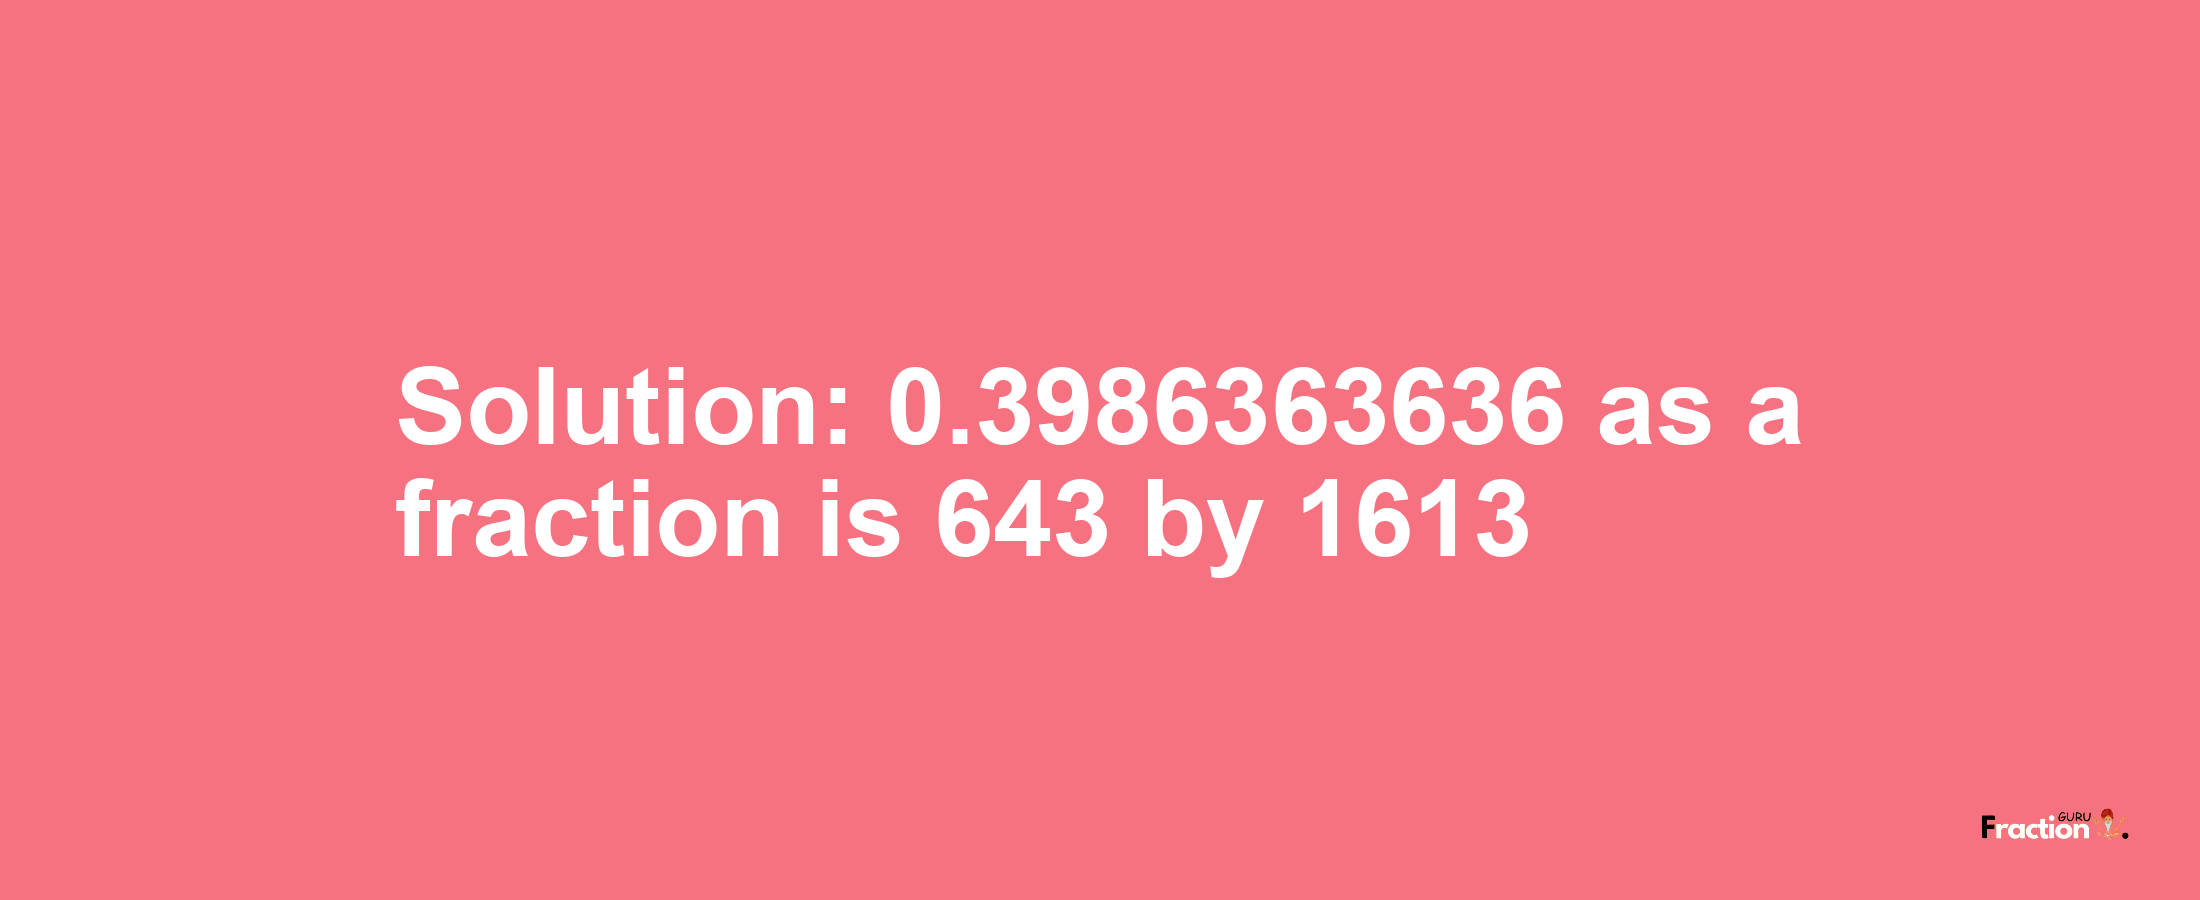 Solution:0.3986363636 as a fraction is 643/1613